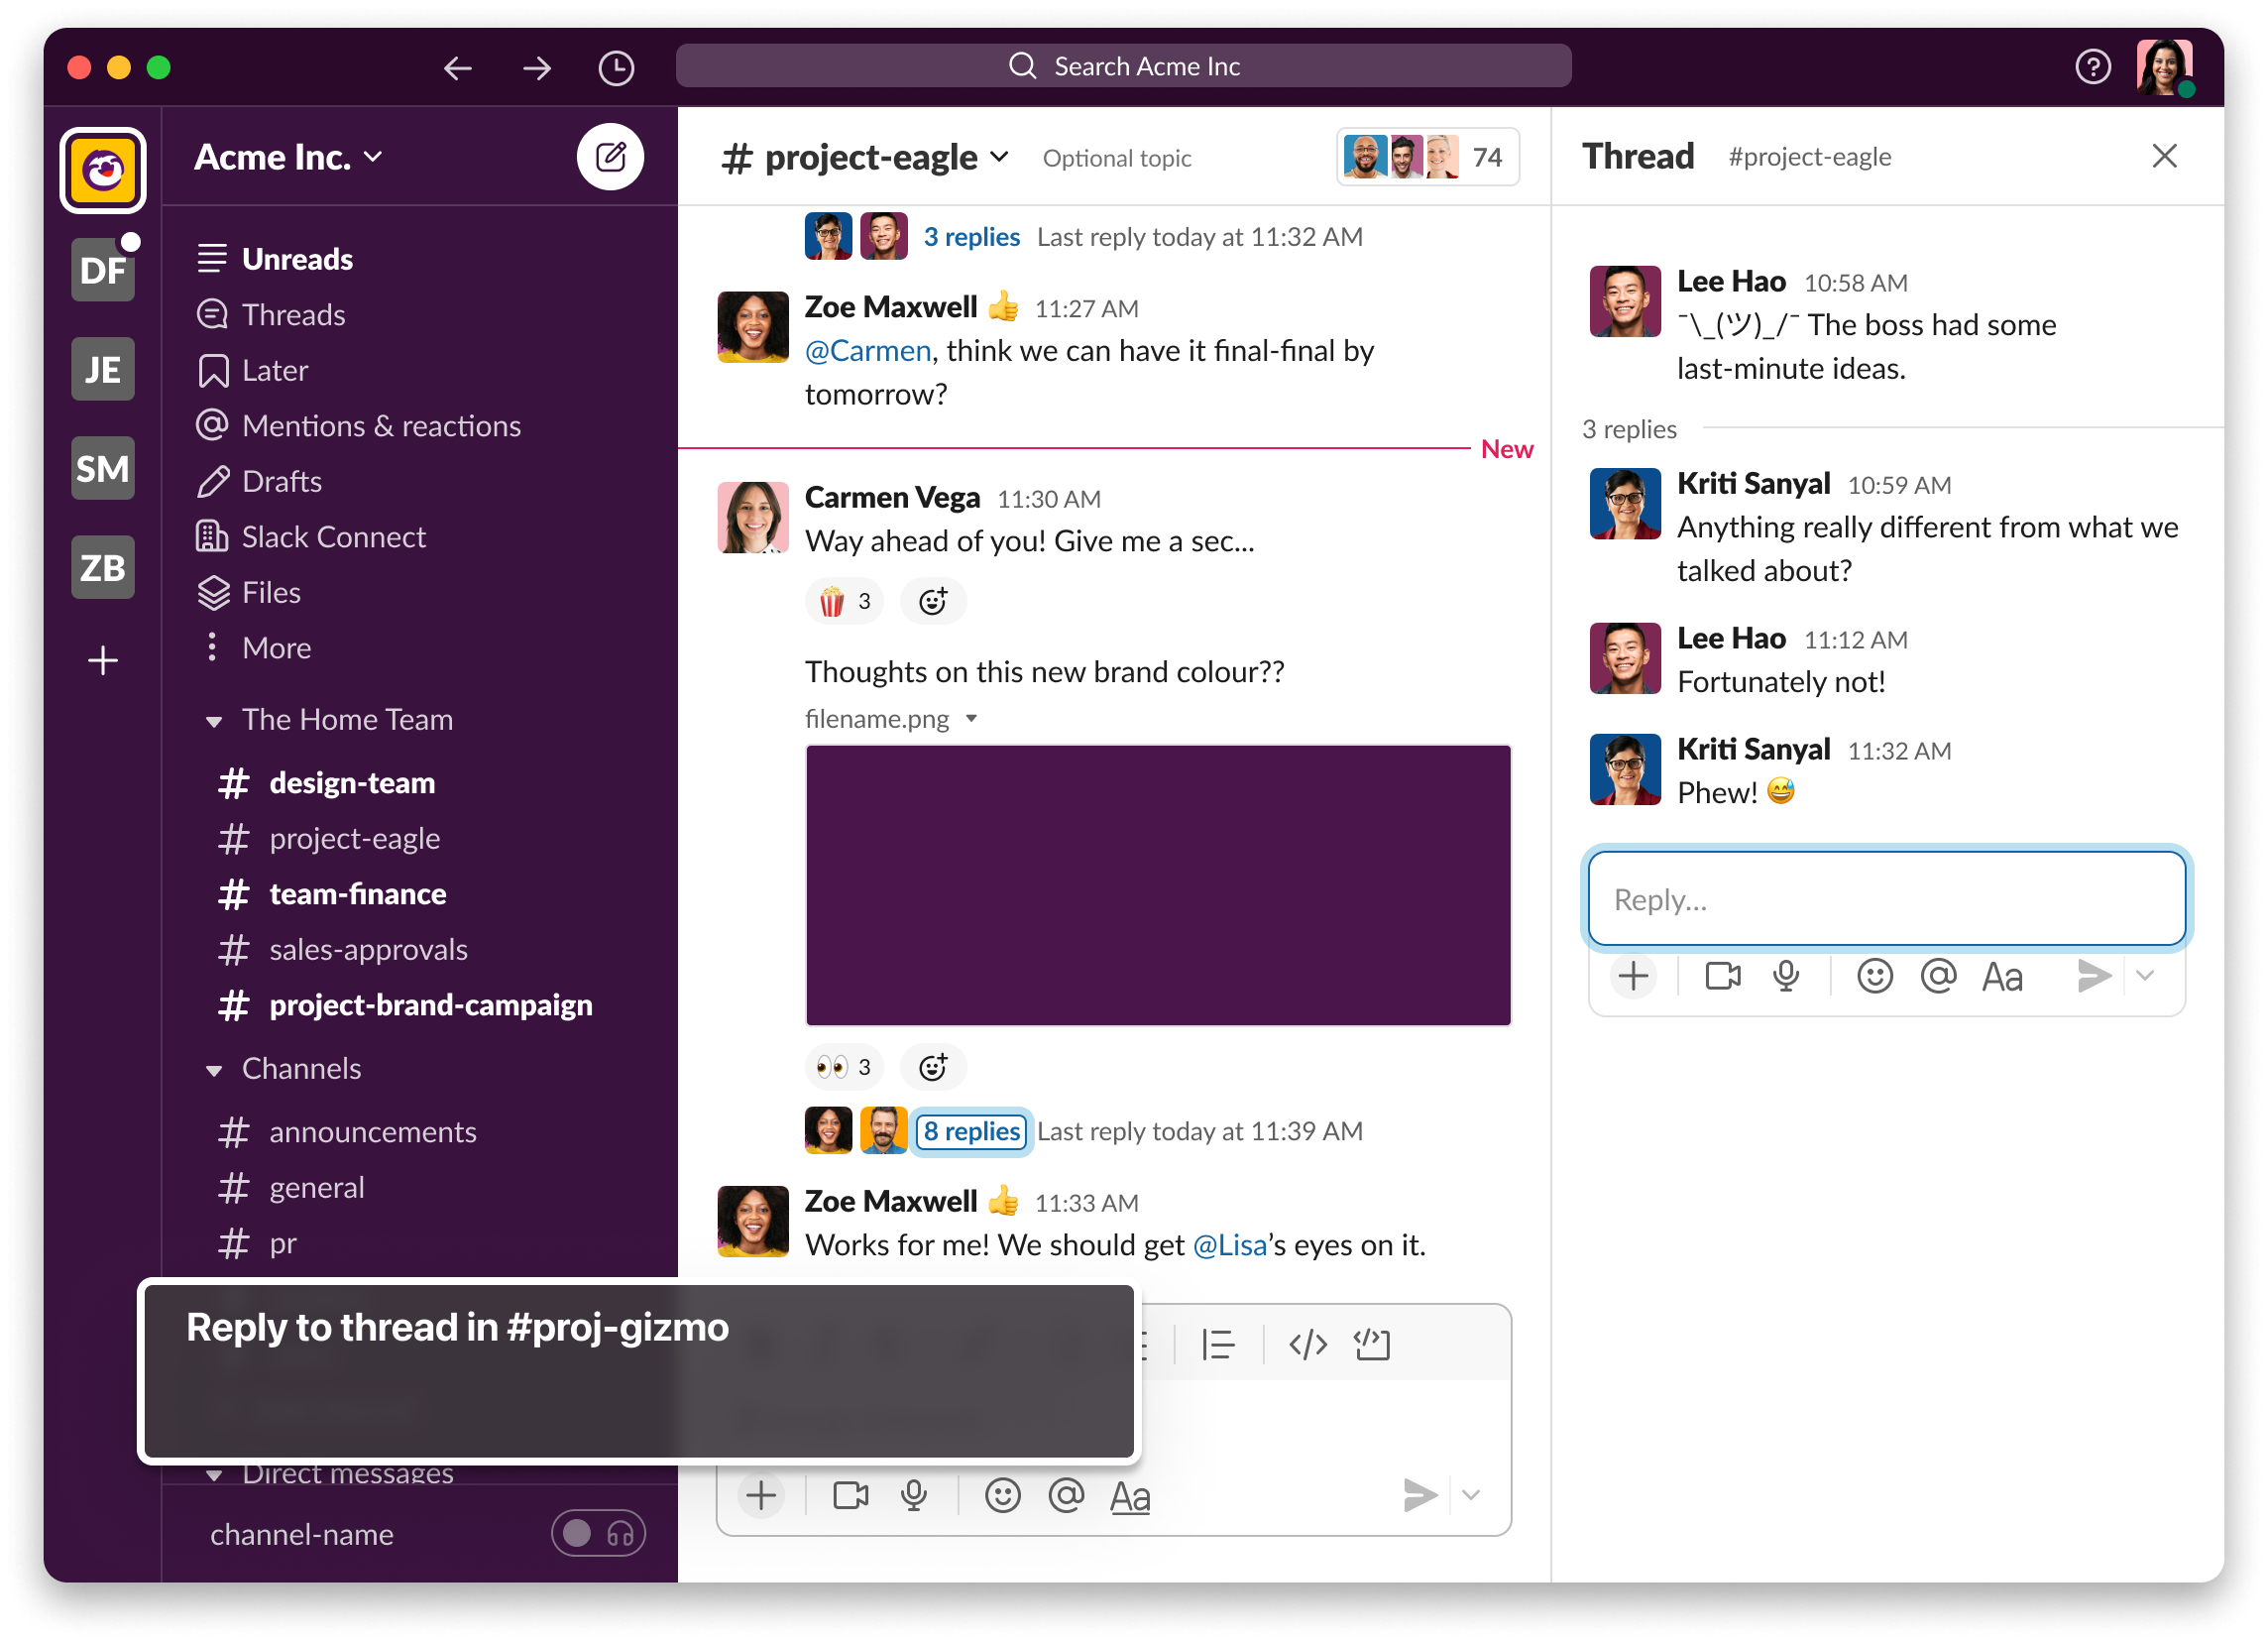 An image of Slack’s UI with keyboard focus on the composer inside of a thread, and a visual depiction of VoiceOver’s announcement “Reply to thread in #proj-gizmo”.